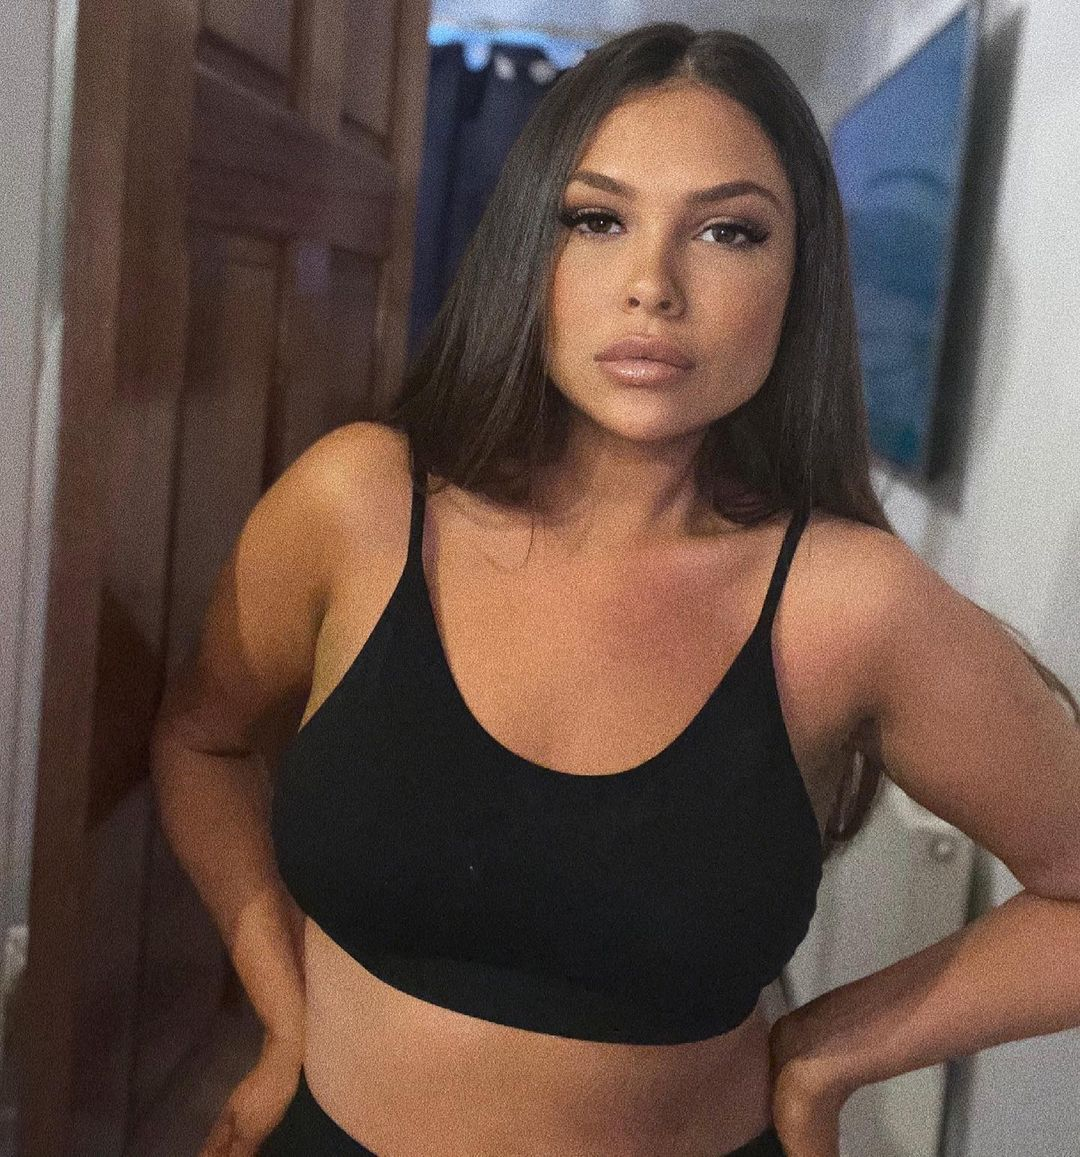 Towie’s Fran Parman goes Instagram official with new boyfriend as she shares sweet snap